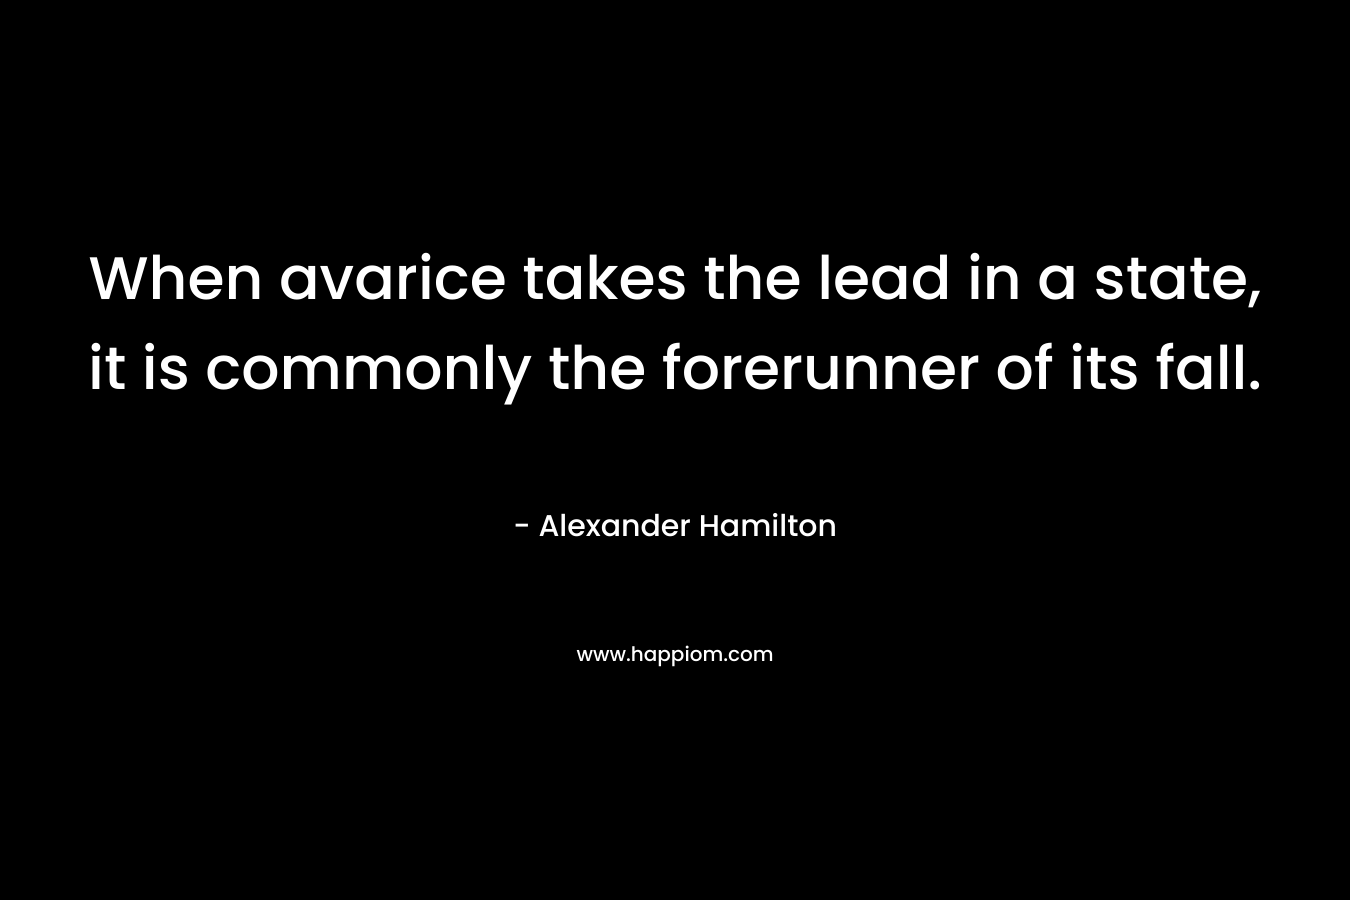 When avarice takes the lead in a state, it is commonly the forerunner of its fall. – Alexander Hamilton